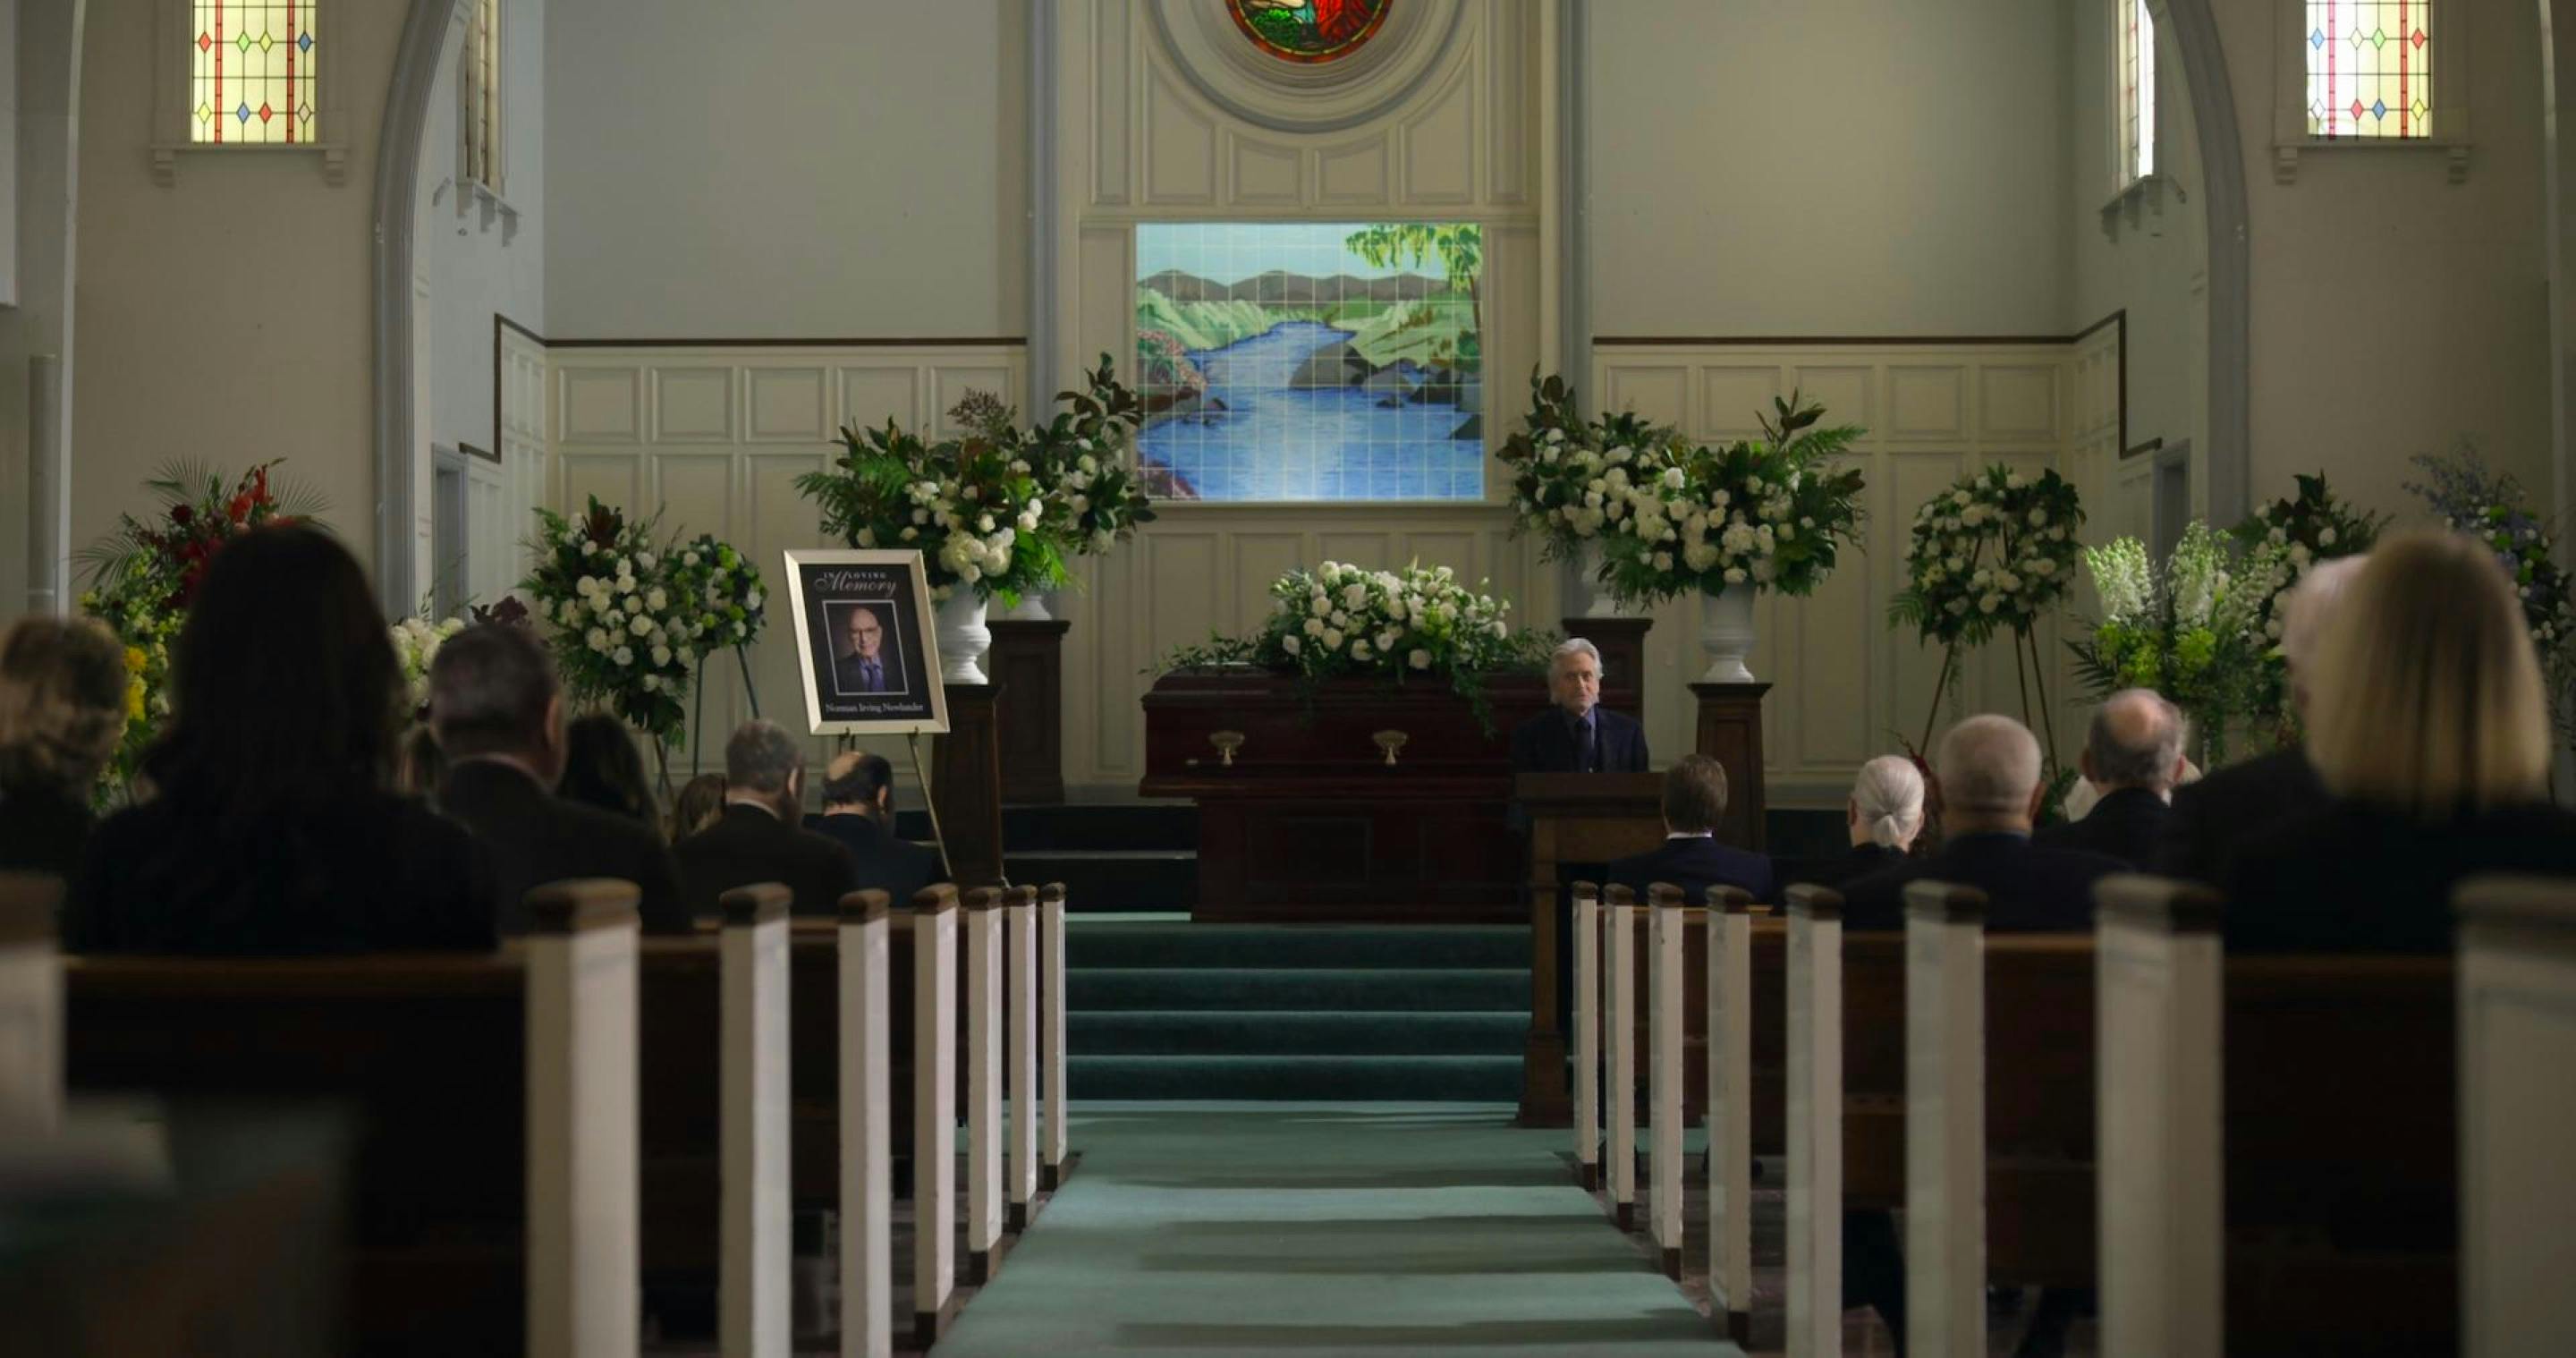 This shot shows a brightly lit funeral. Pews line either side, and we see the backs of many people’s heads. Michael Douglas’s character, Sandy Kominksy, delivers an unexpected eulogy for his best friend, Norman Newlander (Alan Arkin). This is a poster with an image of Newlander to the left of the coffin, and flowers line the back wall.